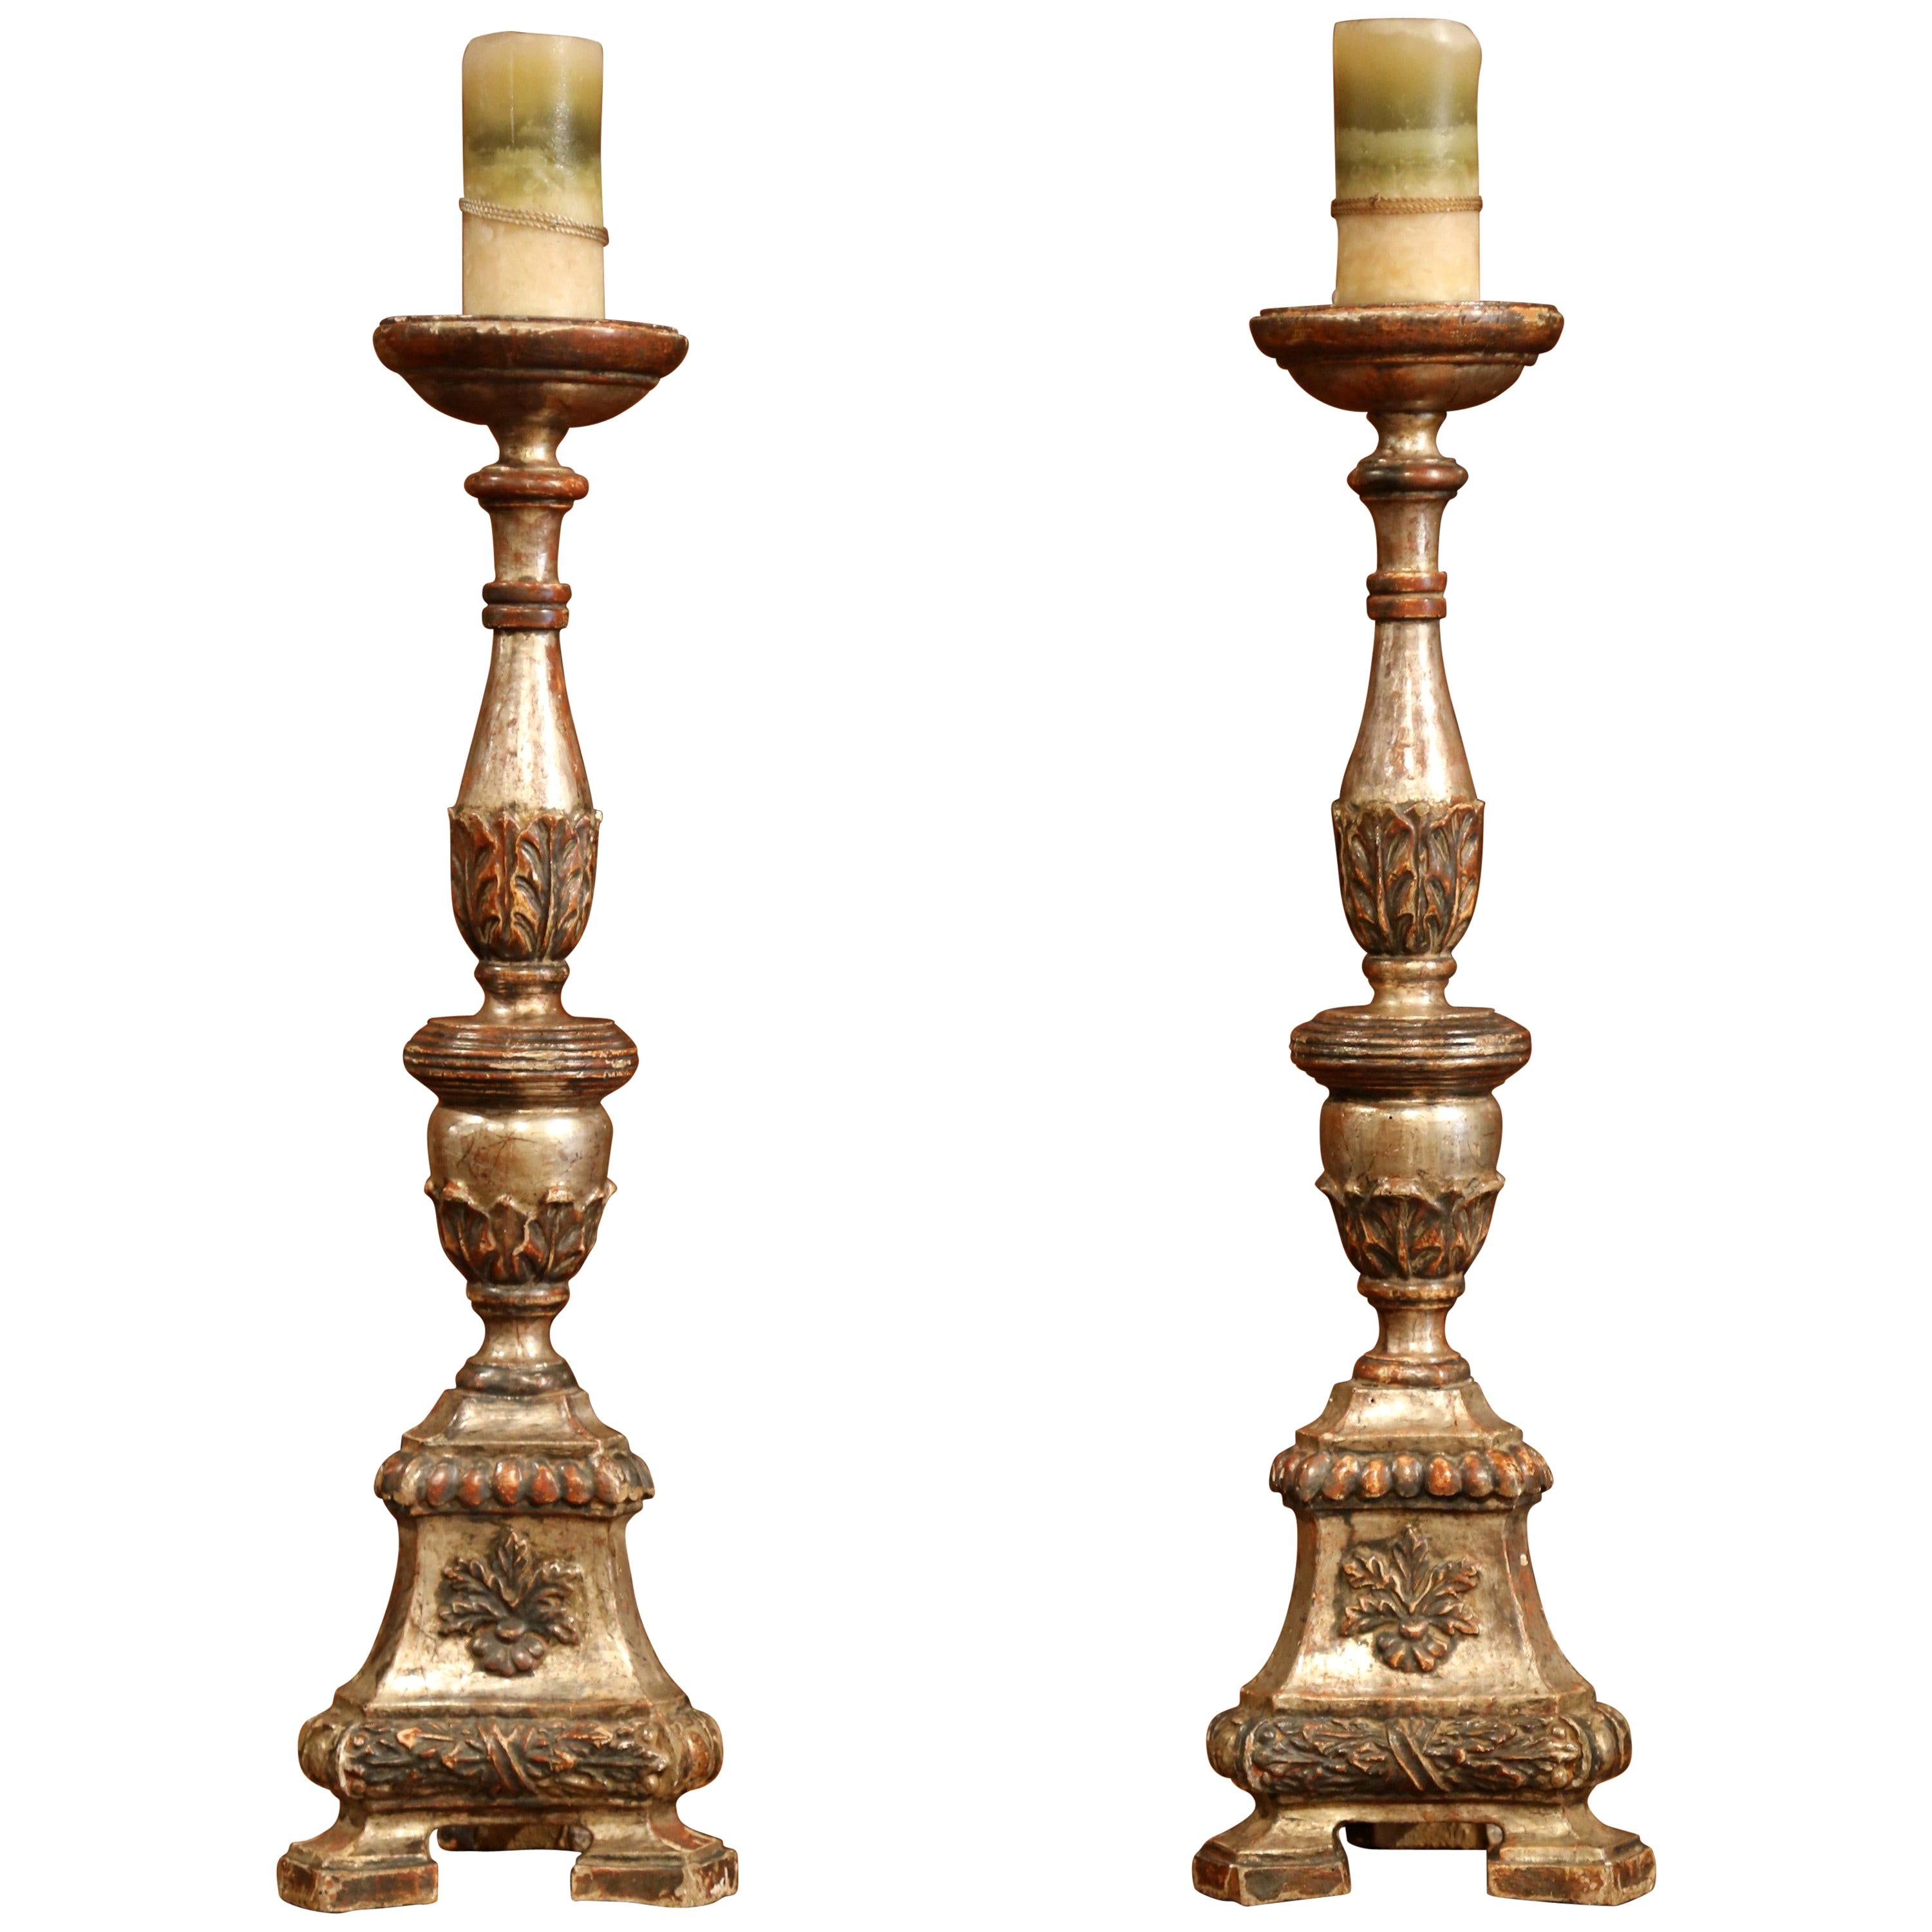 Pair of 19th Century Italian Carved Two-Tone Silver Leaf Candlesticks Prickets